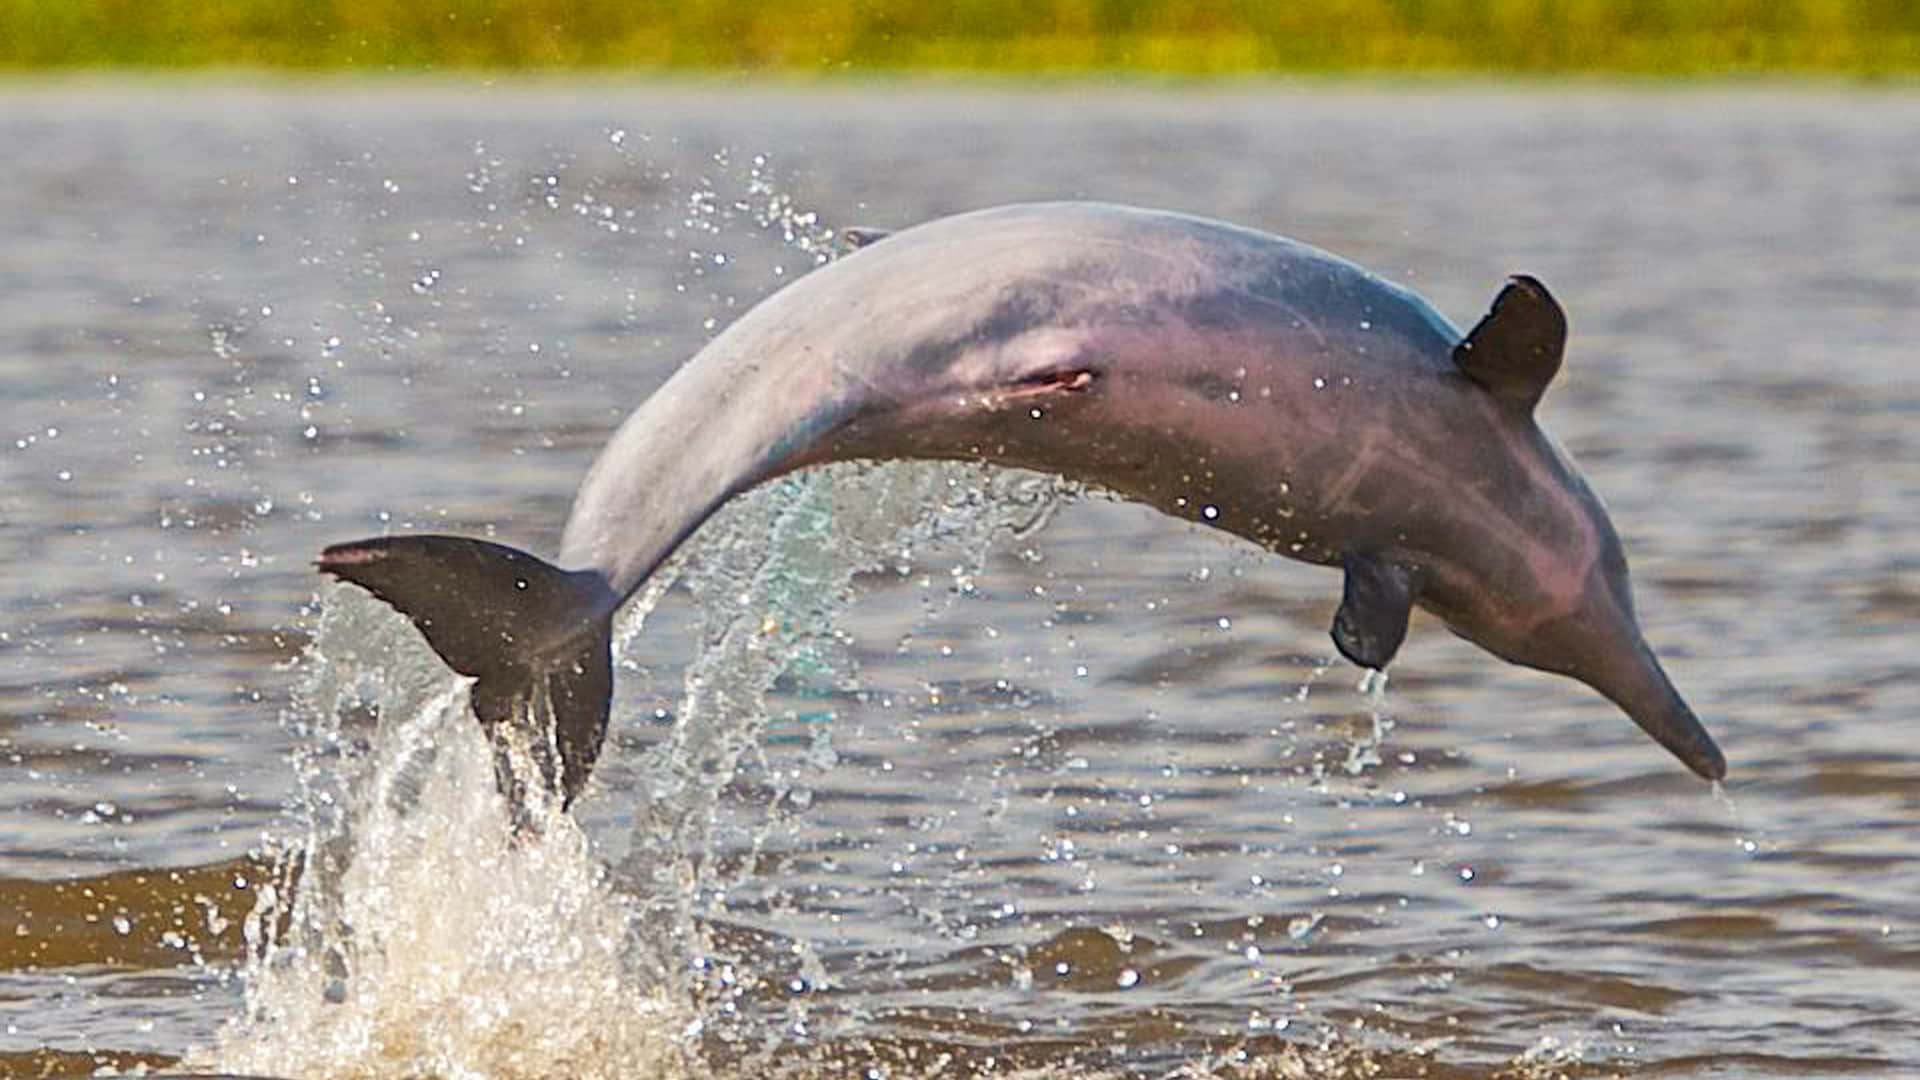 11River dolphin jumping out of the water | Responsible Travel Peru